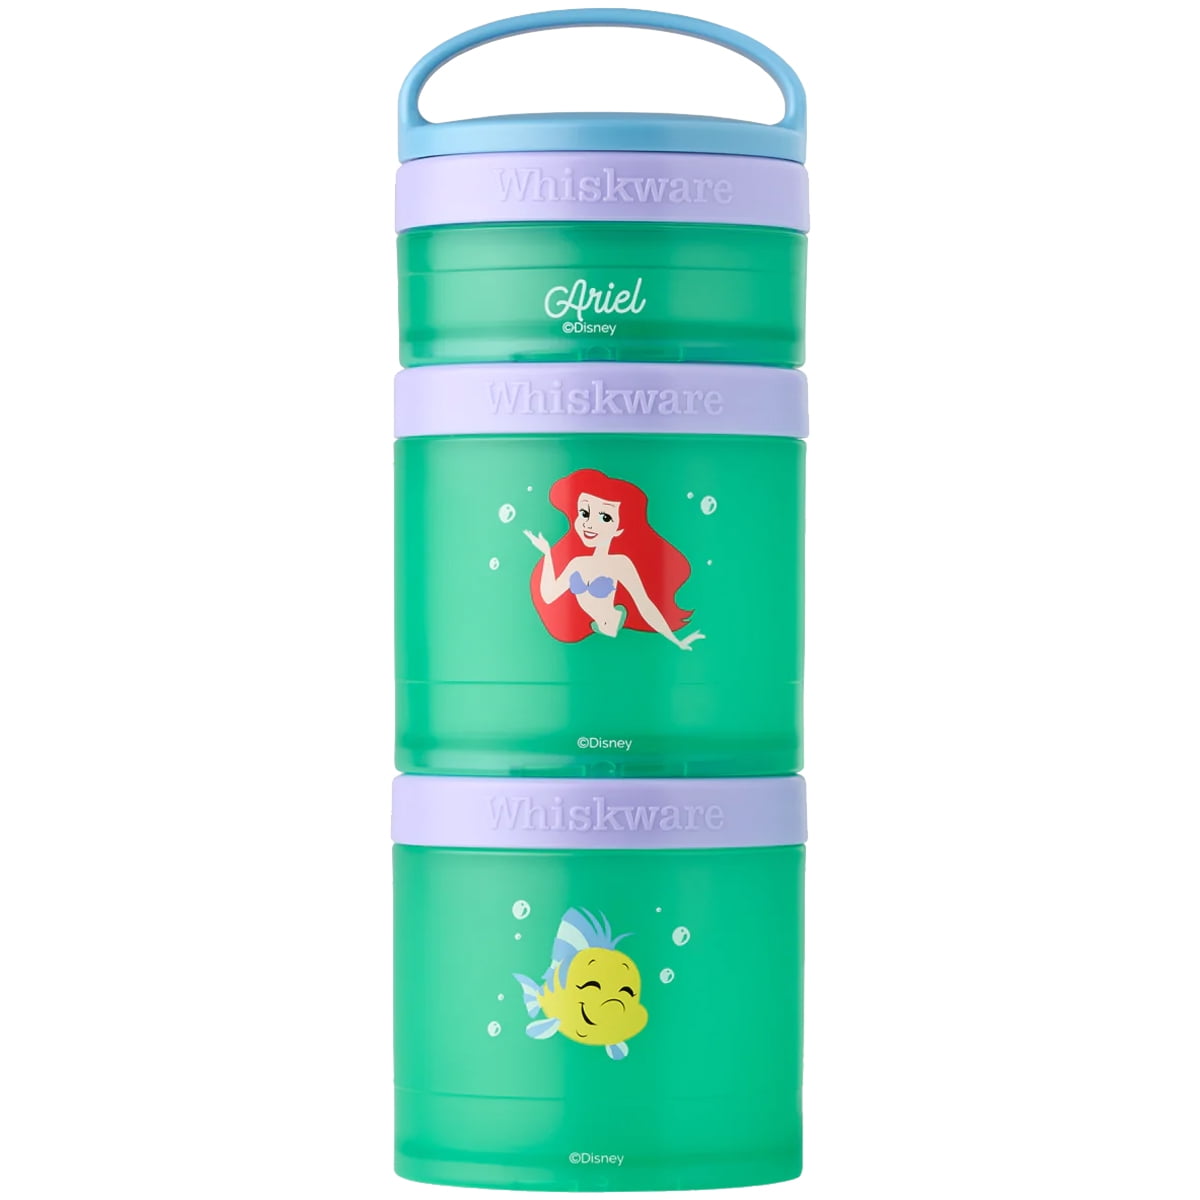 Whiskware Pixar Stackable Snack Pack Containers - Buzz Lightyear